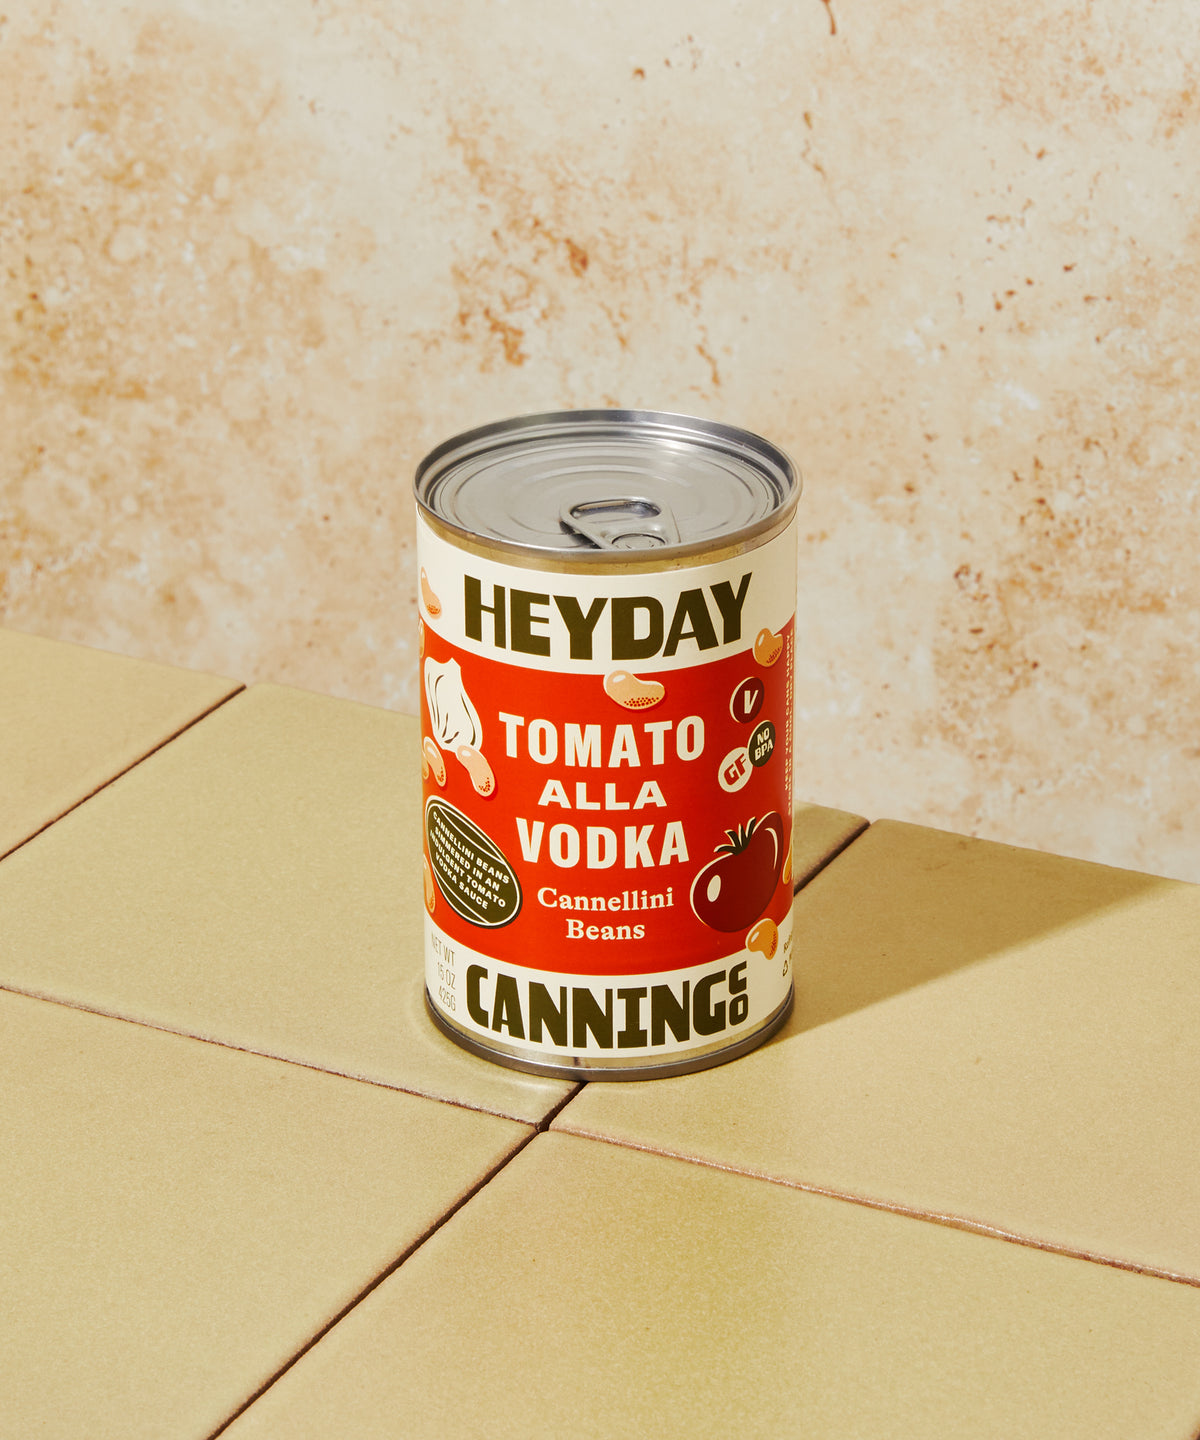 Heyday Canning Co. - Tomato Alla Vodka Cannellini Beans